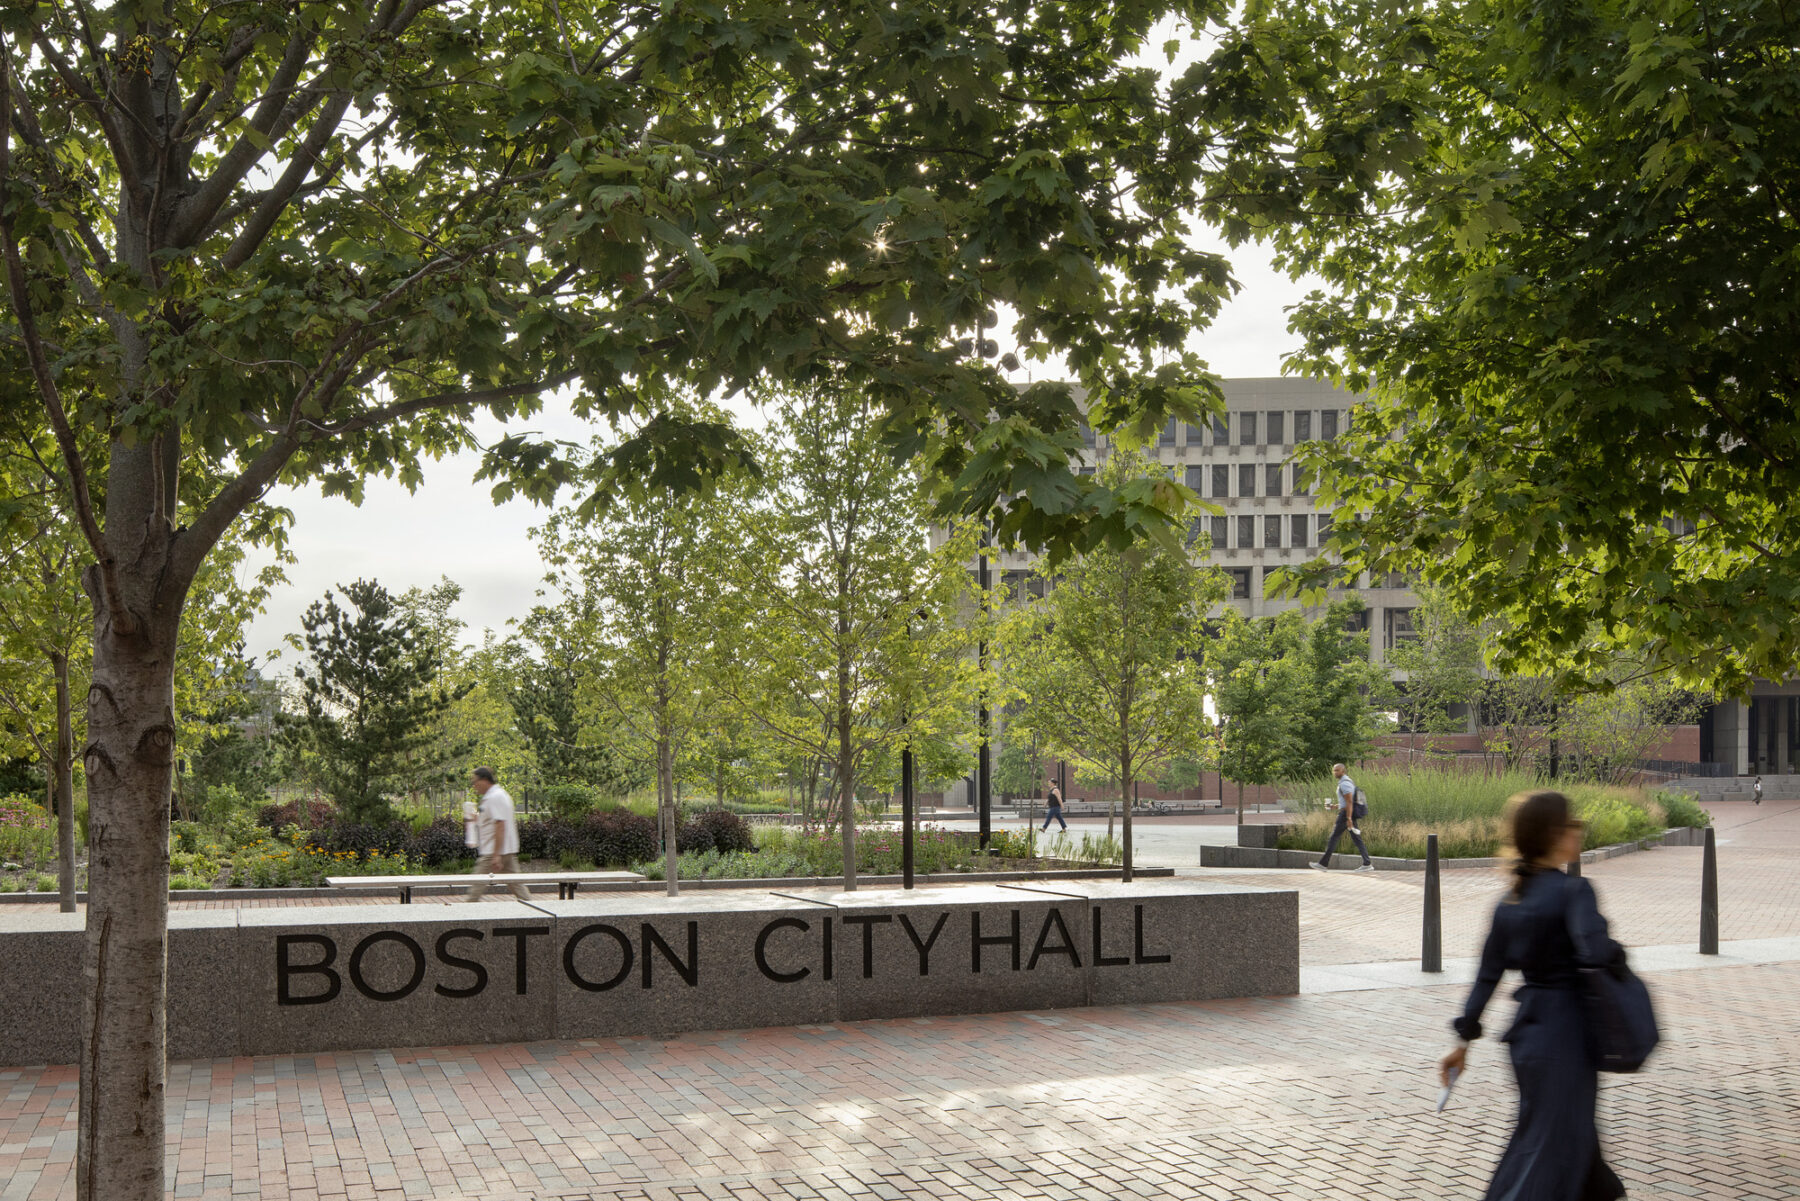 photograph of signage at entrance to Boston City Hall Plaza shaded by trees